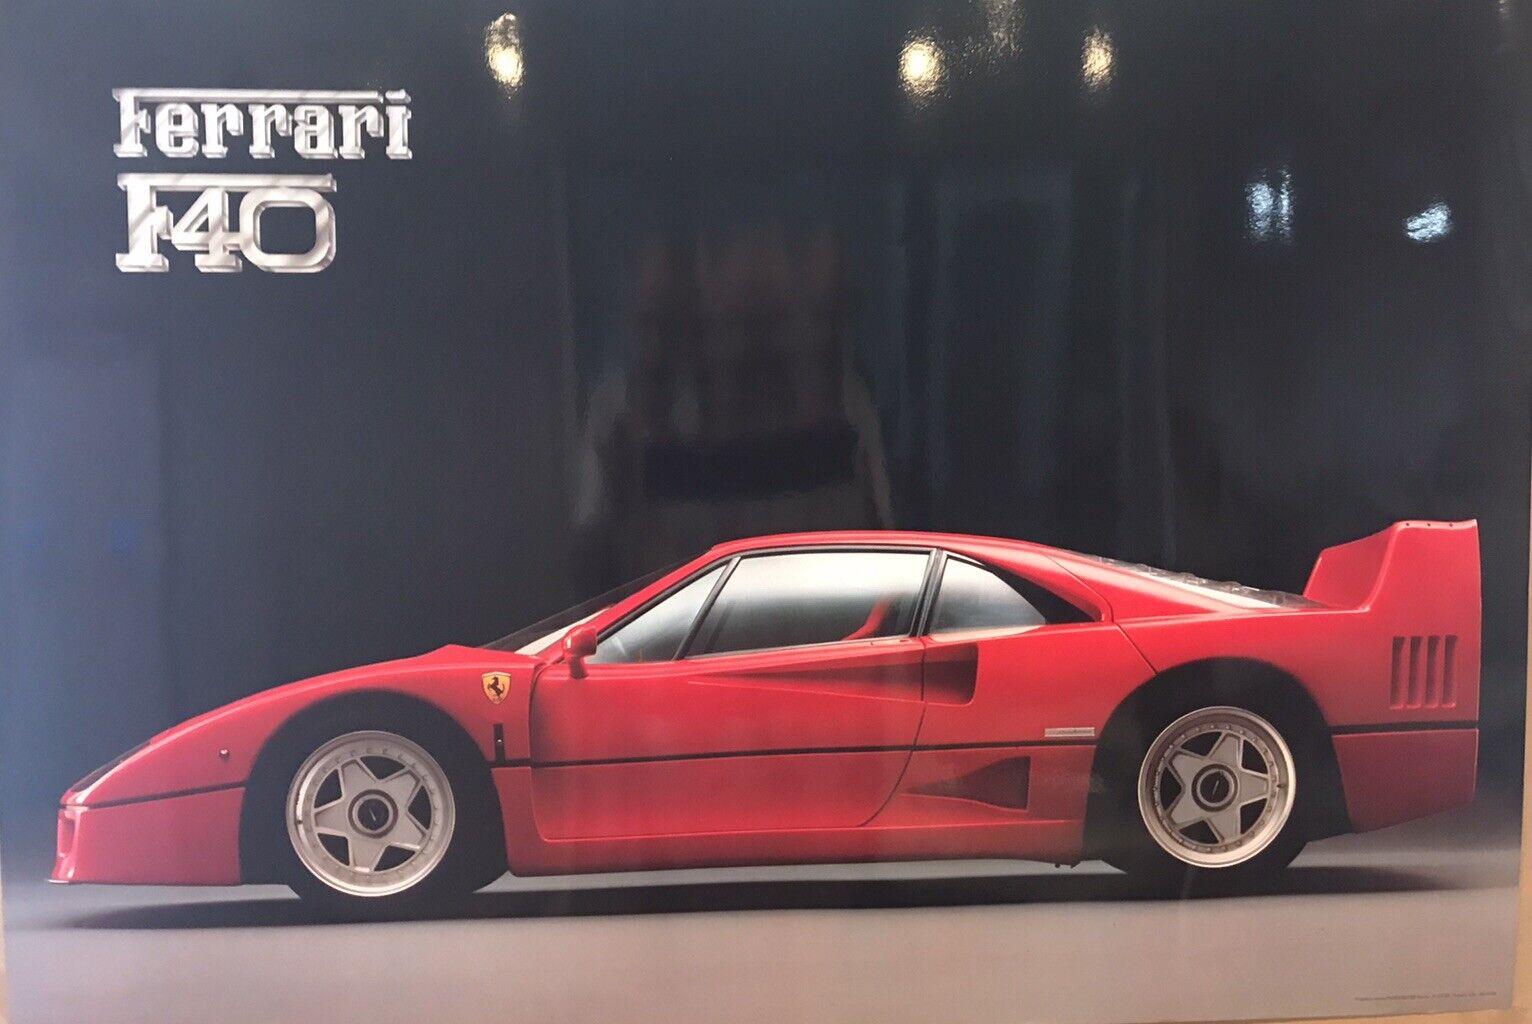 Ferrari F40Factory N.532/88-3m/12/88 Extremely Rare One Only Car Poster